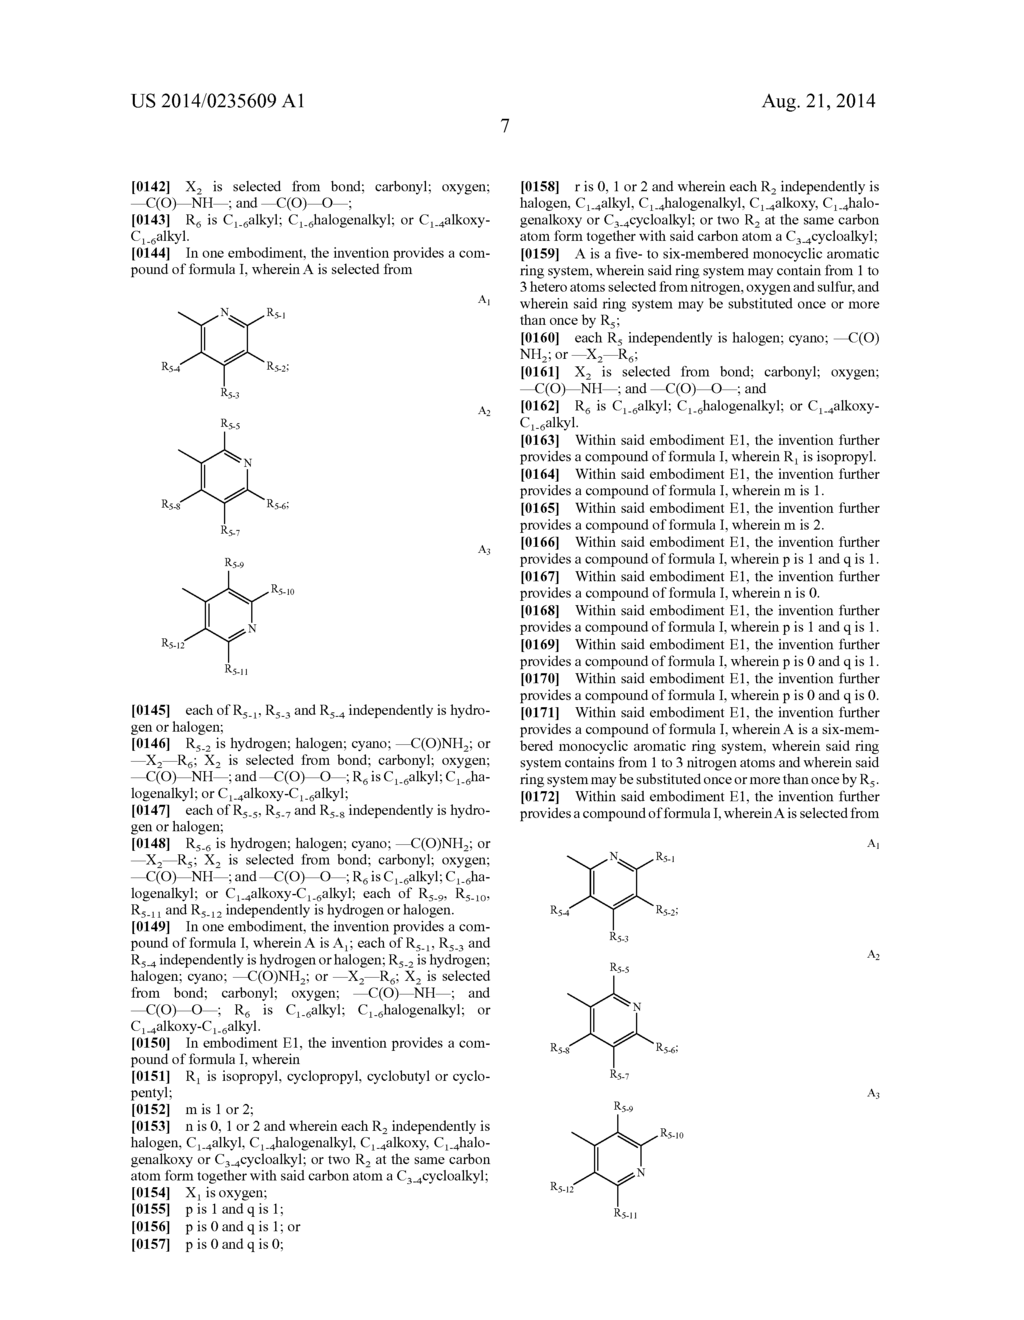 CARBAMATE/UREA DERIVATIVES CONTAINING PIPERIDIN AND PIPERAZIN RINGS AS H3     RECEPTOR INHIBITORS - diagram, schematic, and image 08